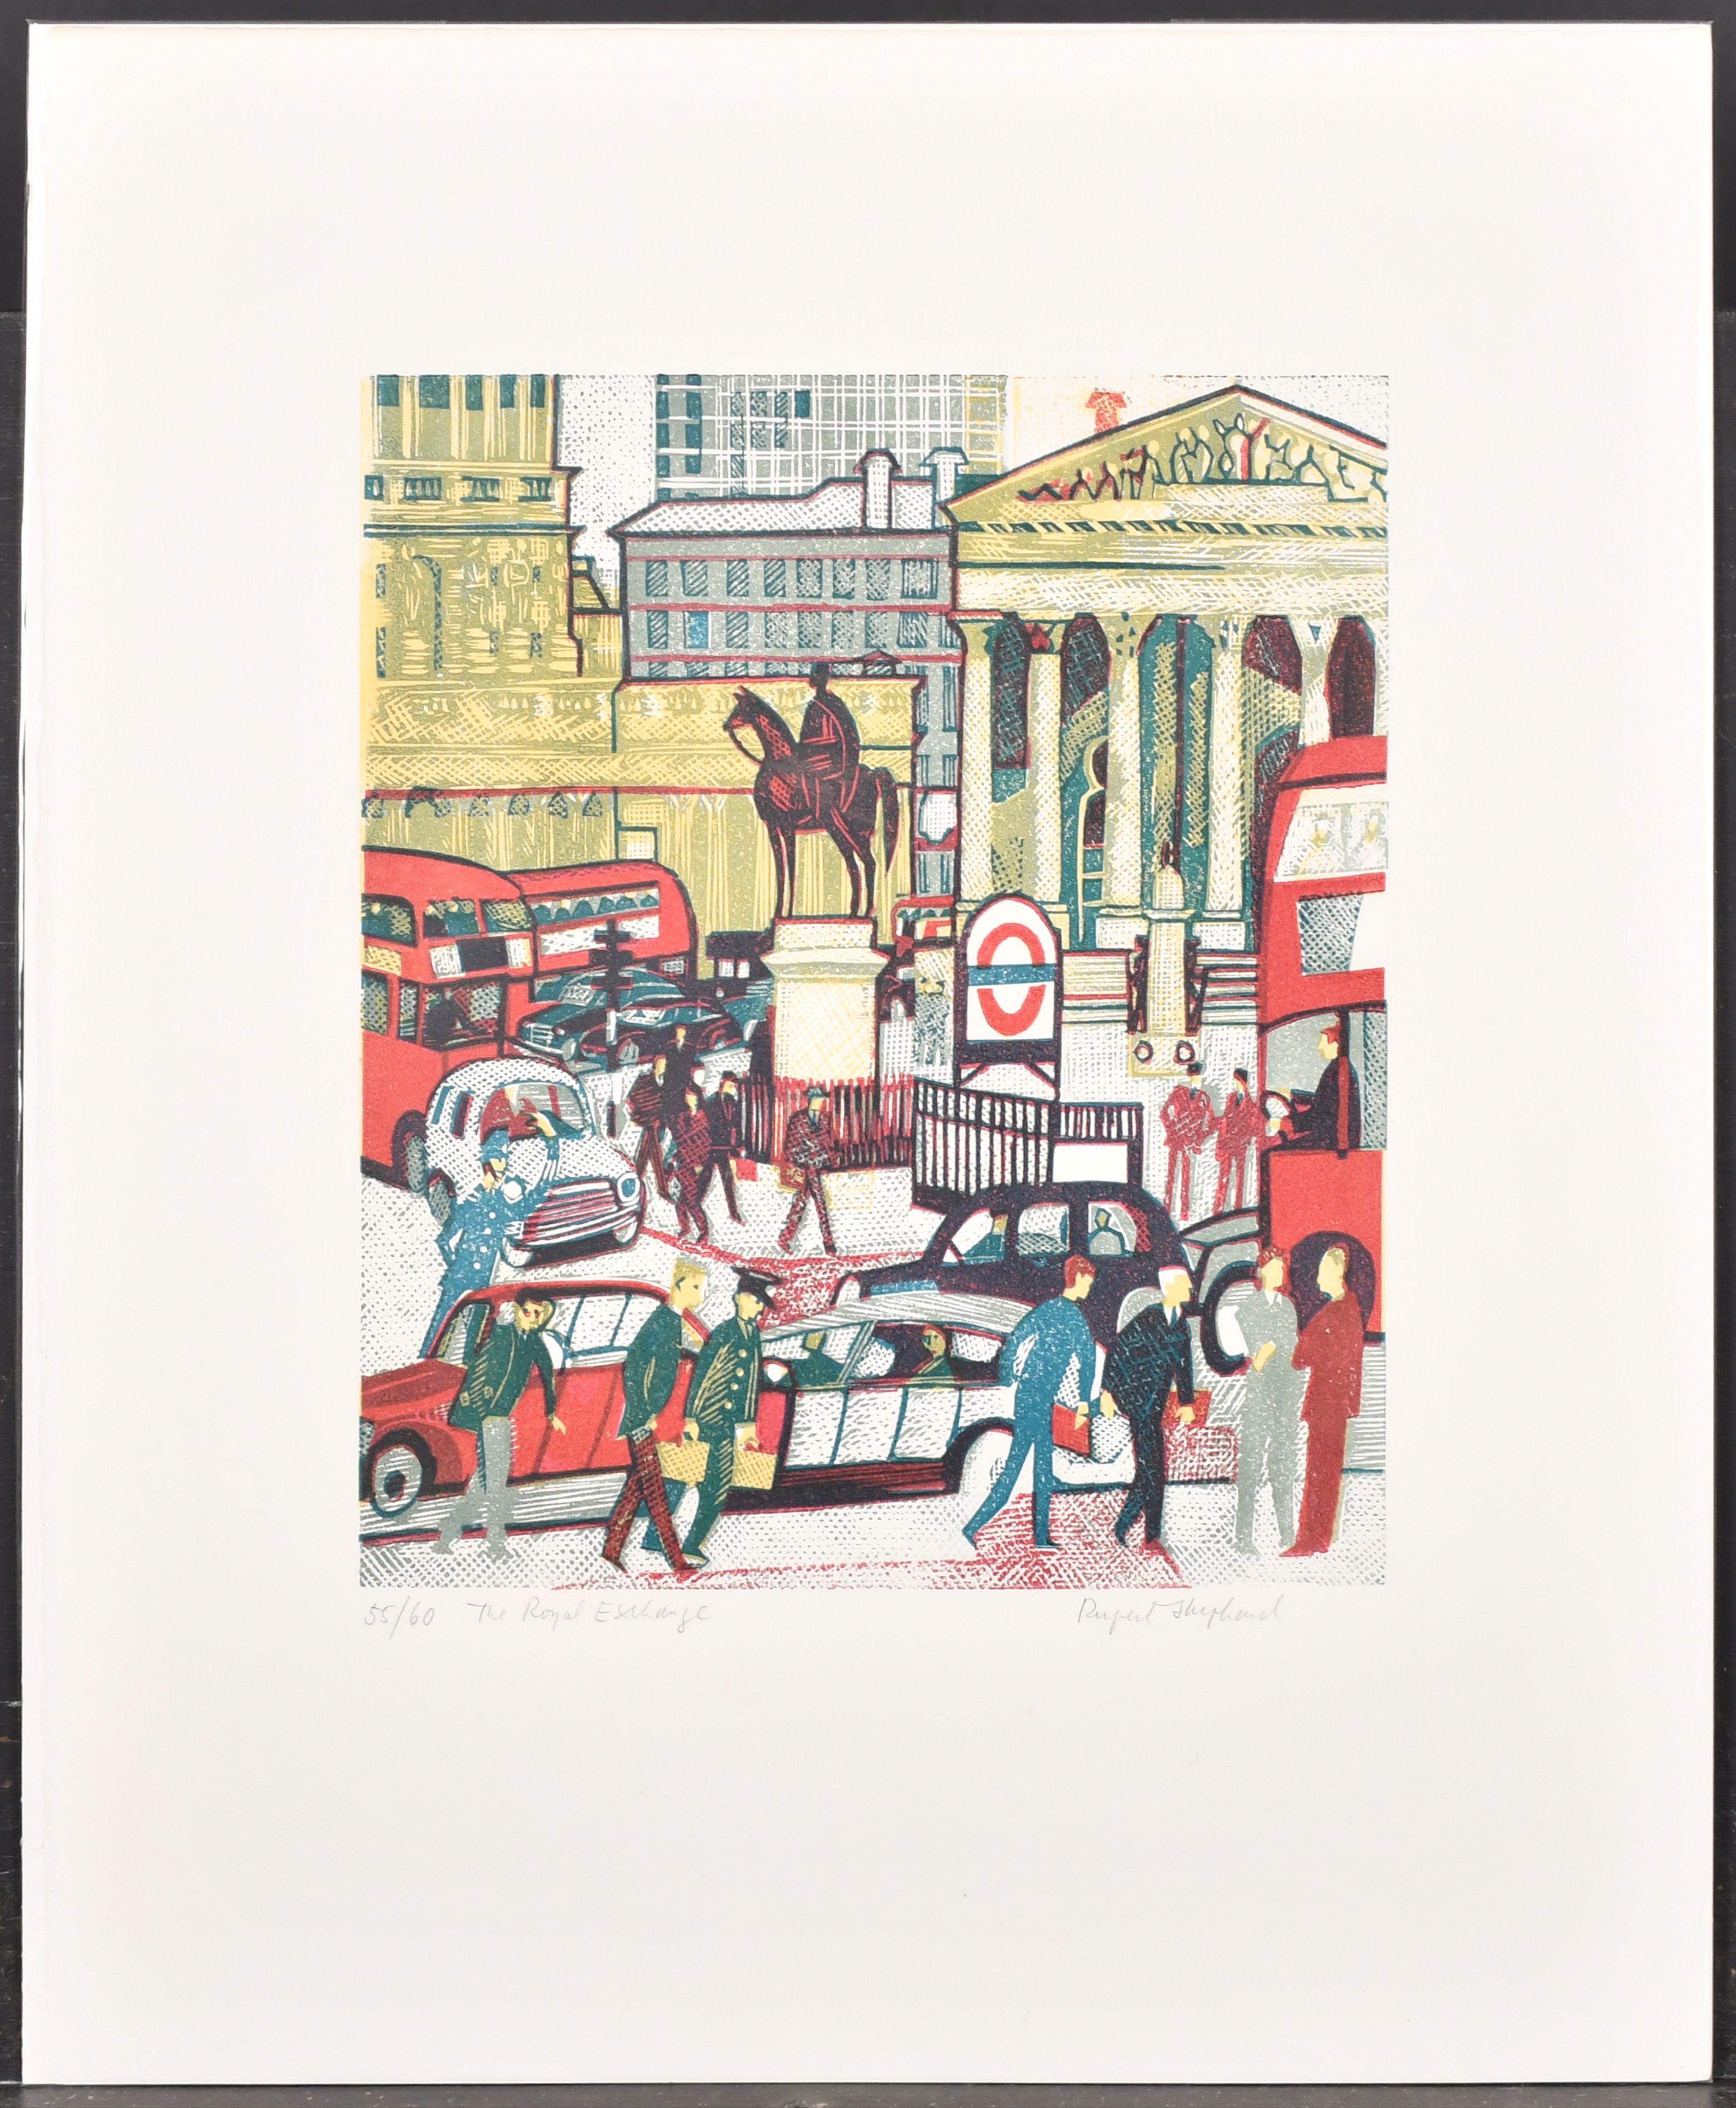 Rupert Shephard (1909-1992) British. "Royal Exchange", Lithograph, Signed, inscribed and numbered - Image 2 of 6